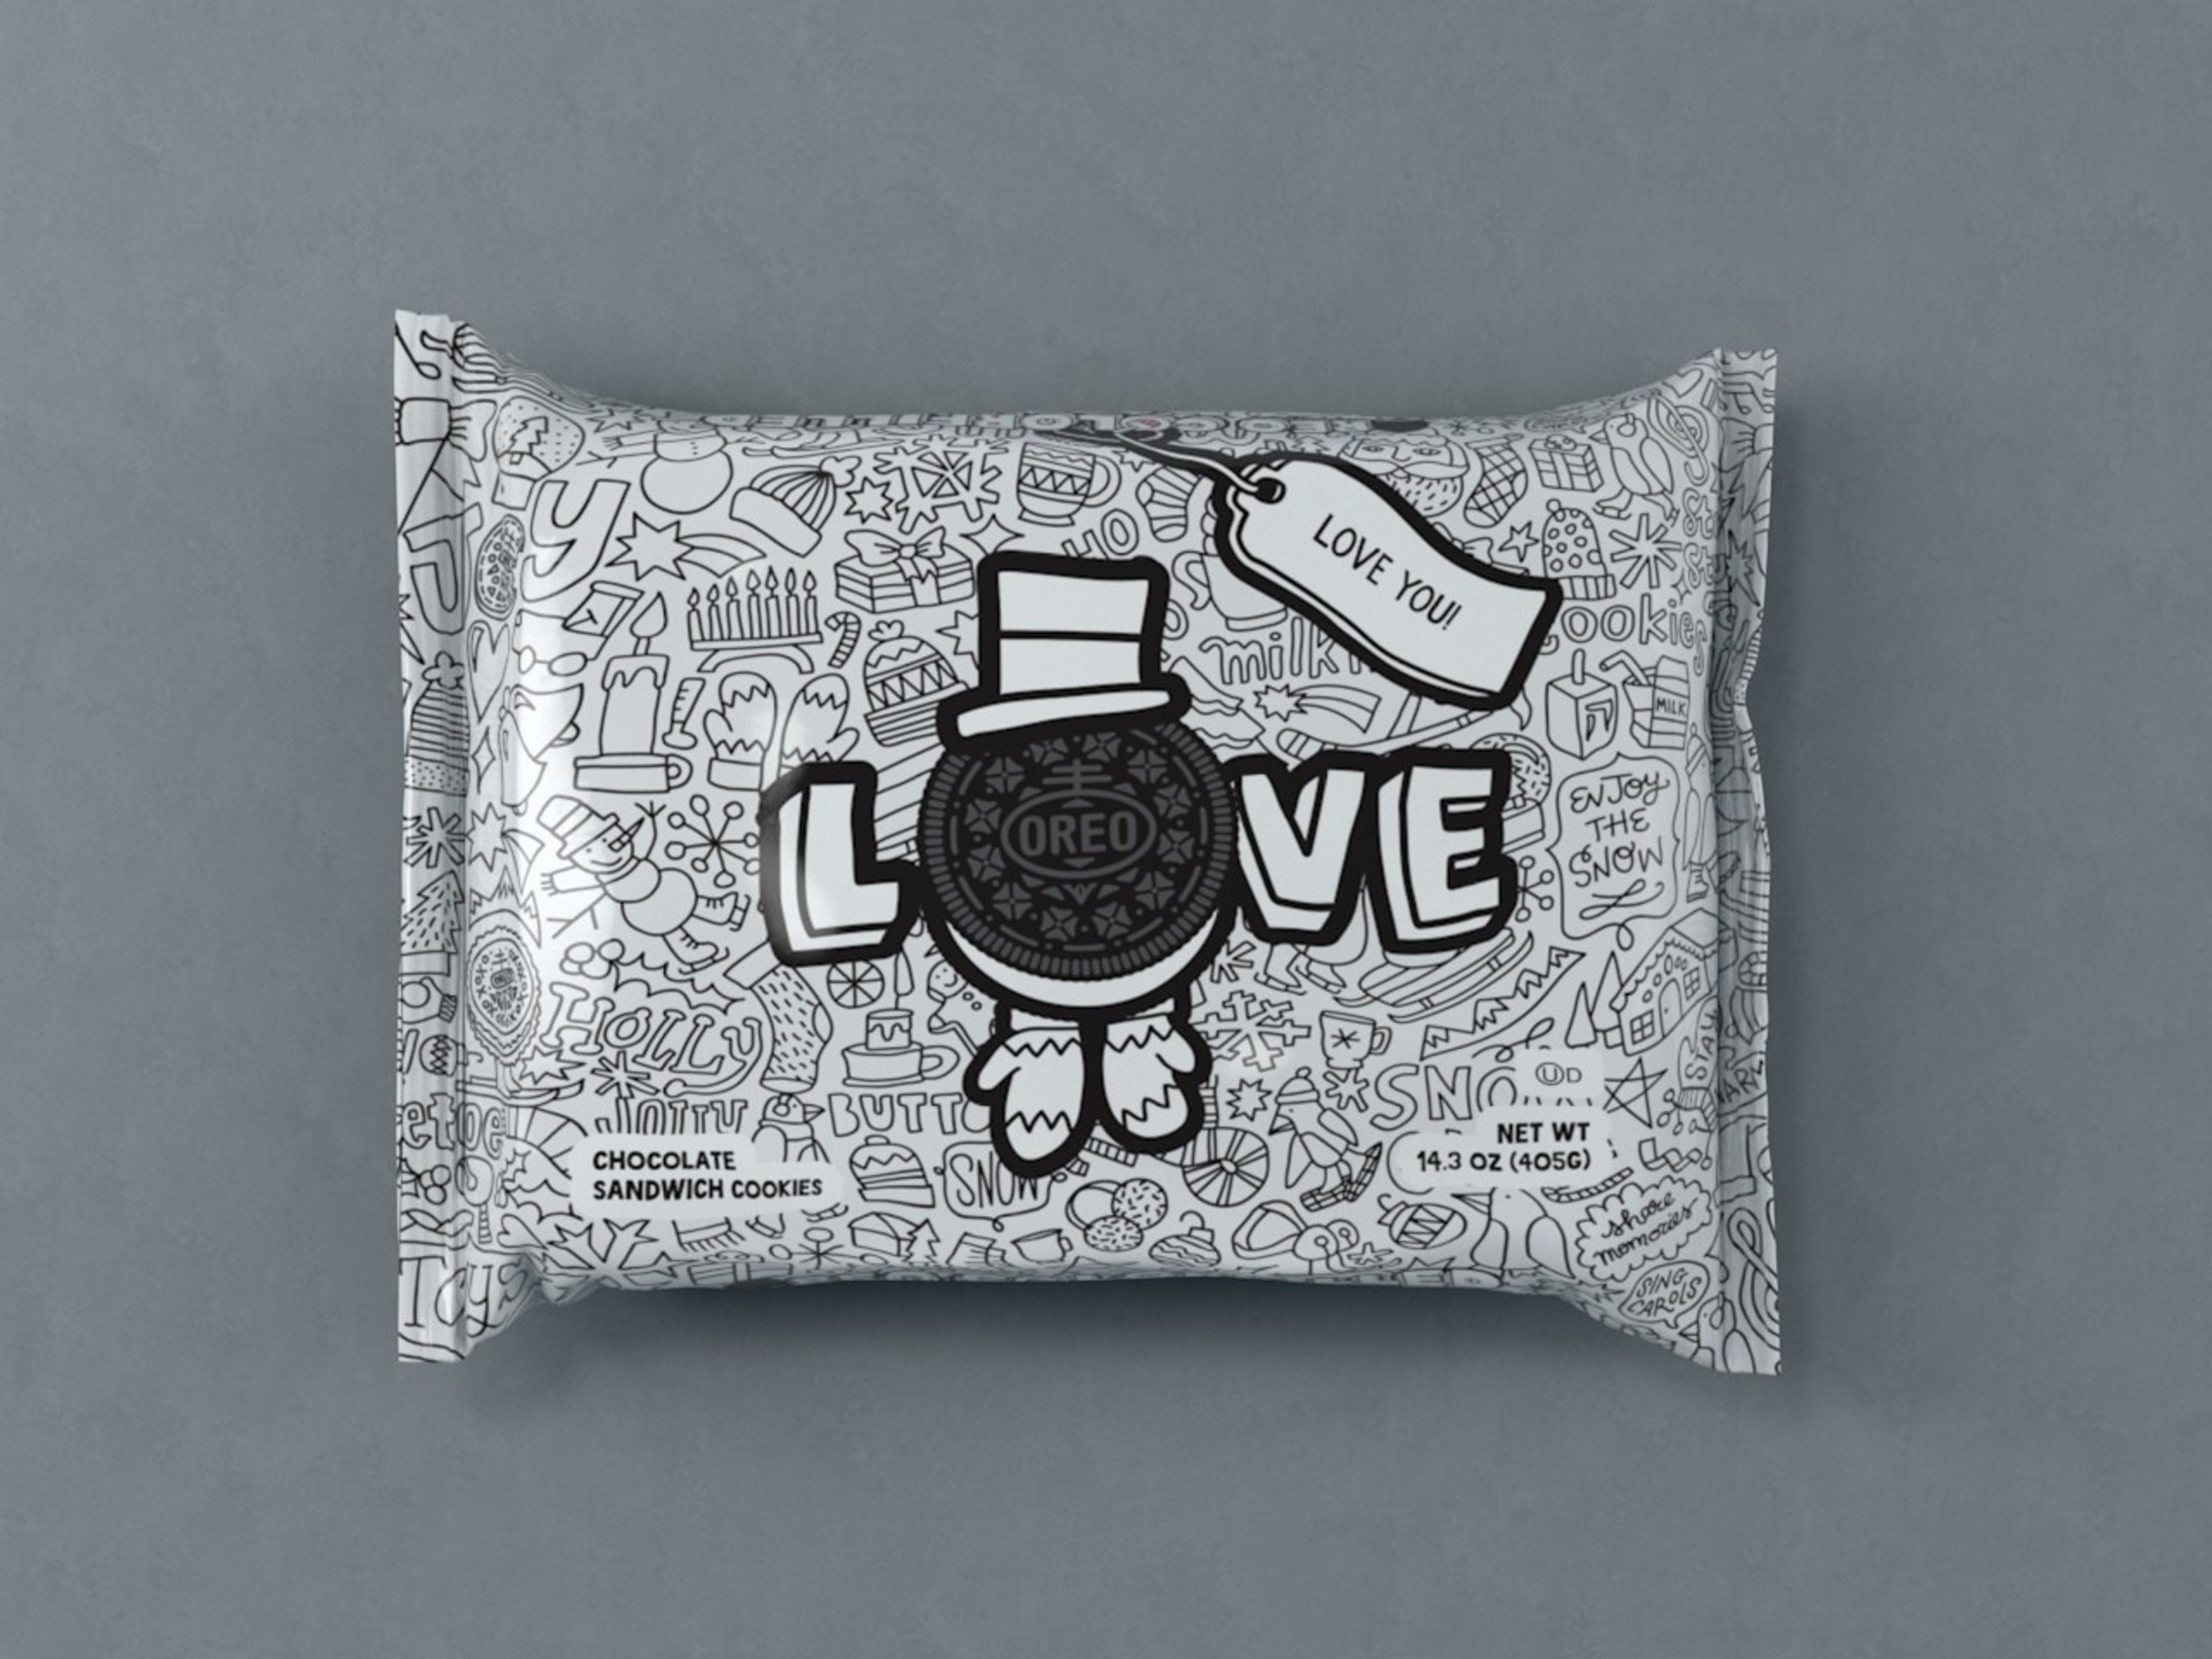 OREO Colorfilled is turning the iconic cookie's wrapper into a canvas for imagination and personalization during the holiday season at shop.oreo.com.